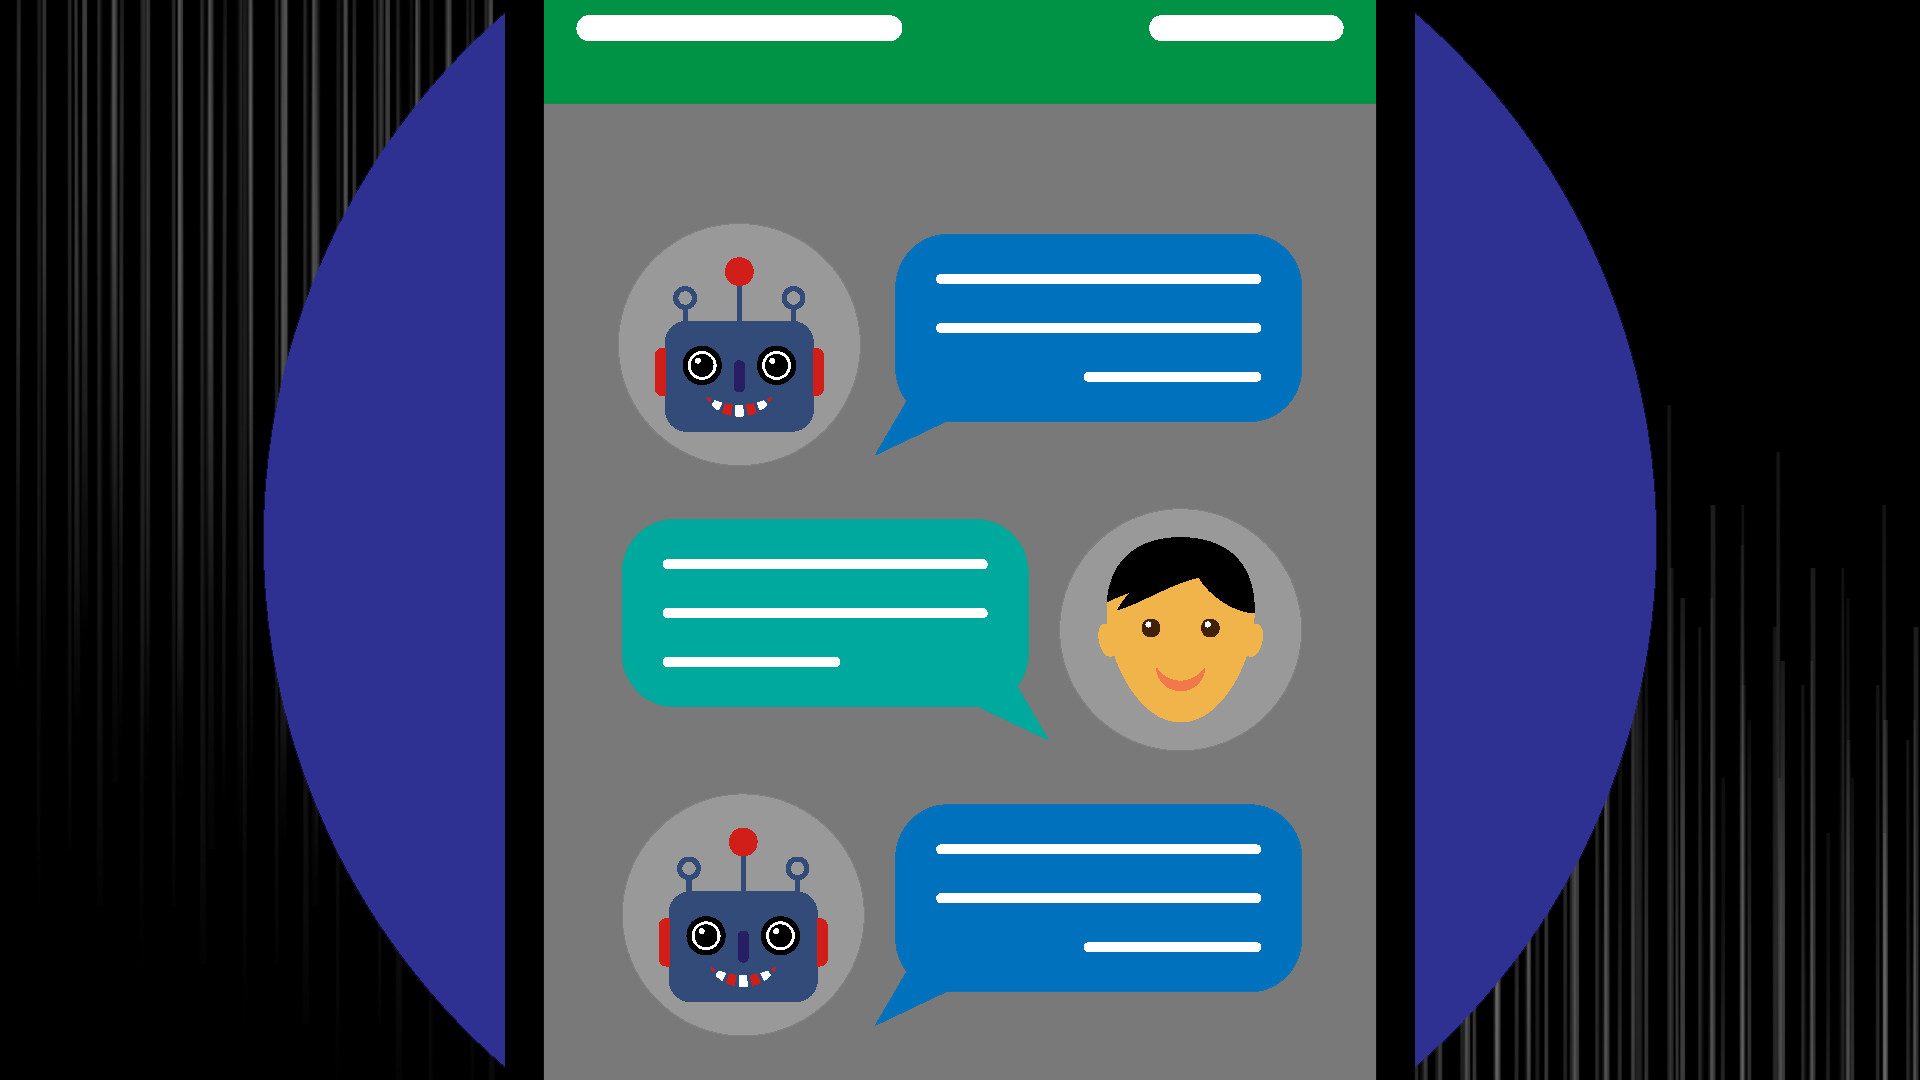 1920x1080 A year ago, chatbots reemerged atop a mountain of hype that messaging  marked tech's latest paradigm shift, after messaging apps Facebook's  Messenger and Kik ...